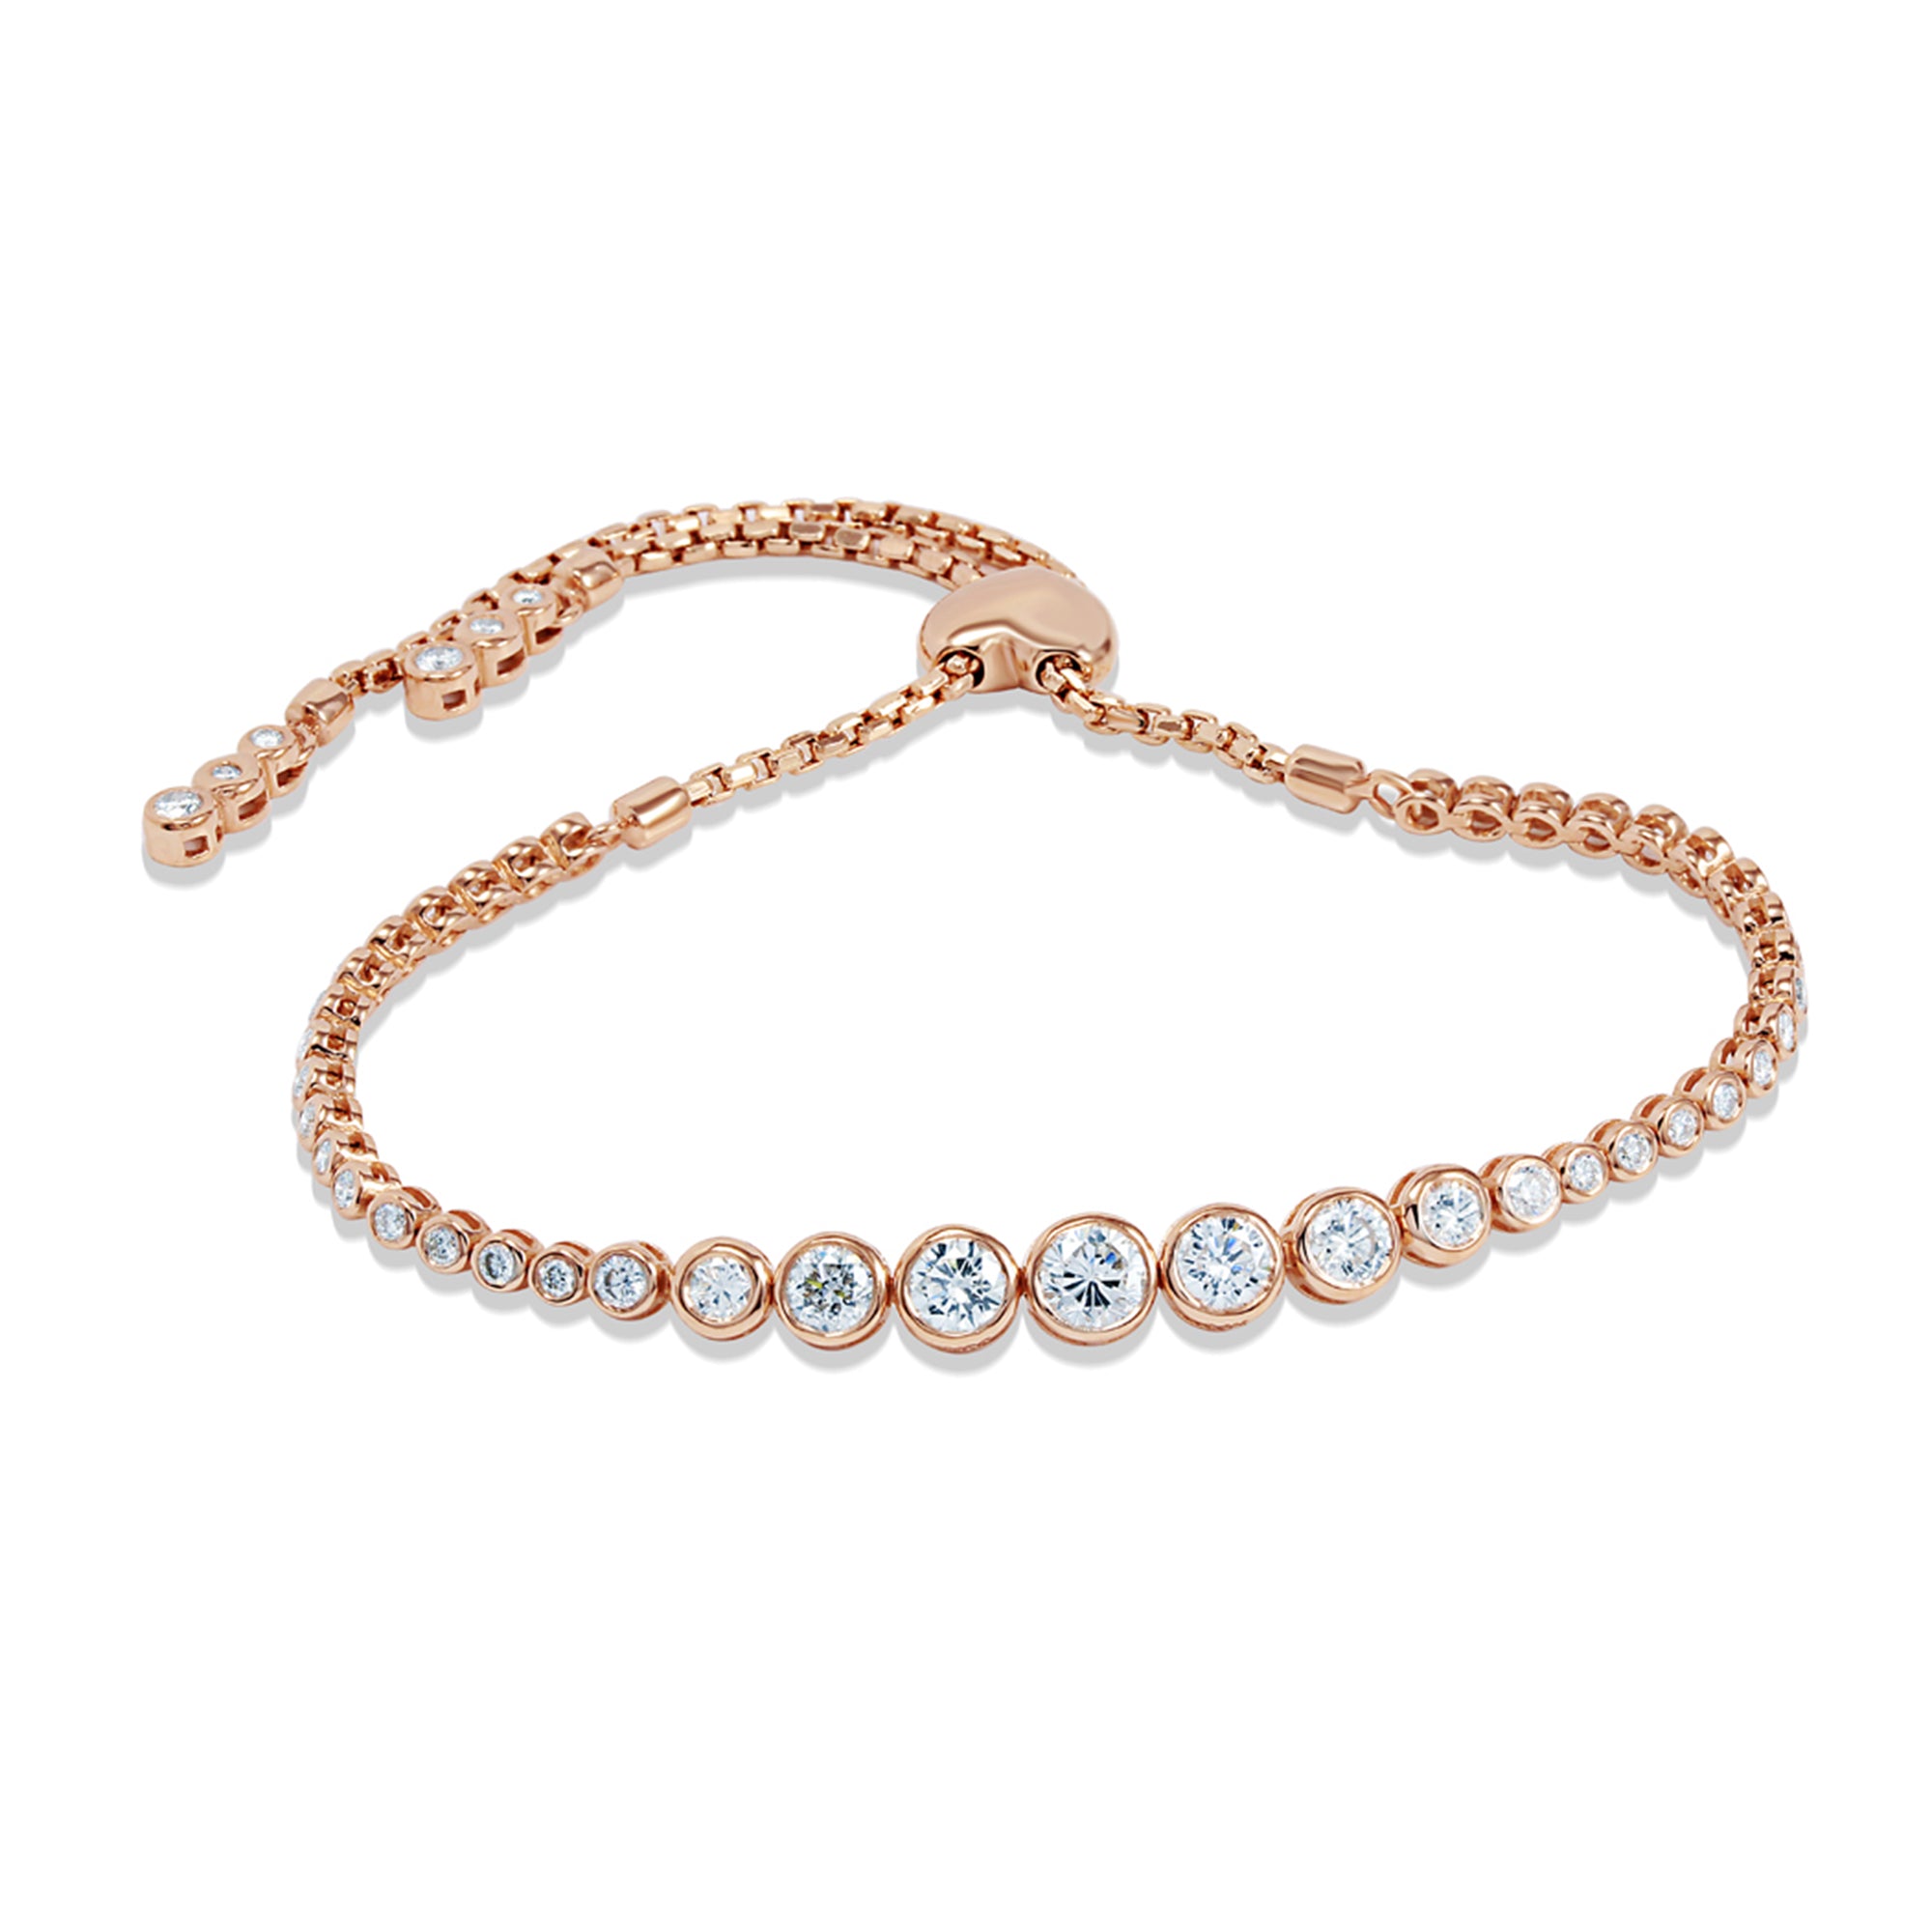 Diamond Bolo Bracelet in 14k Rose Gold, 2.00 Total Carat Weight - Talisman Collection Fine Jewelers